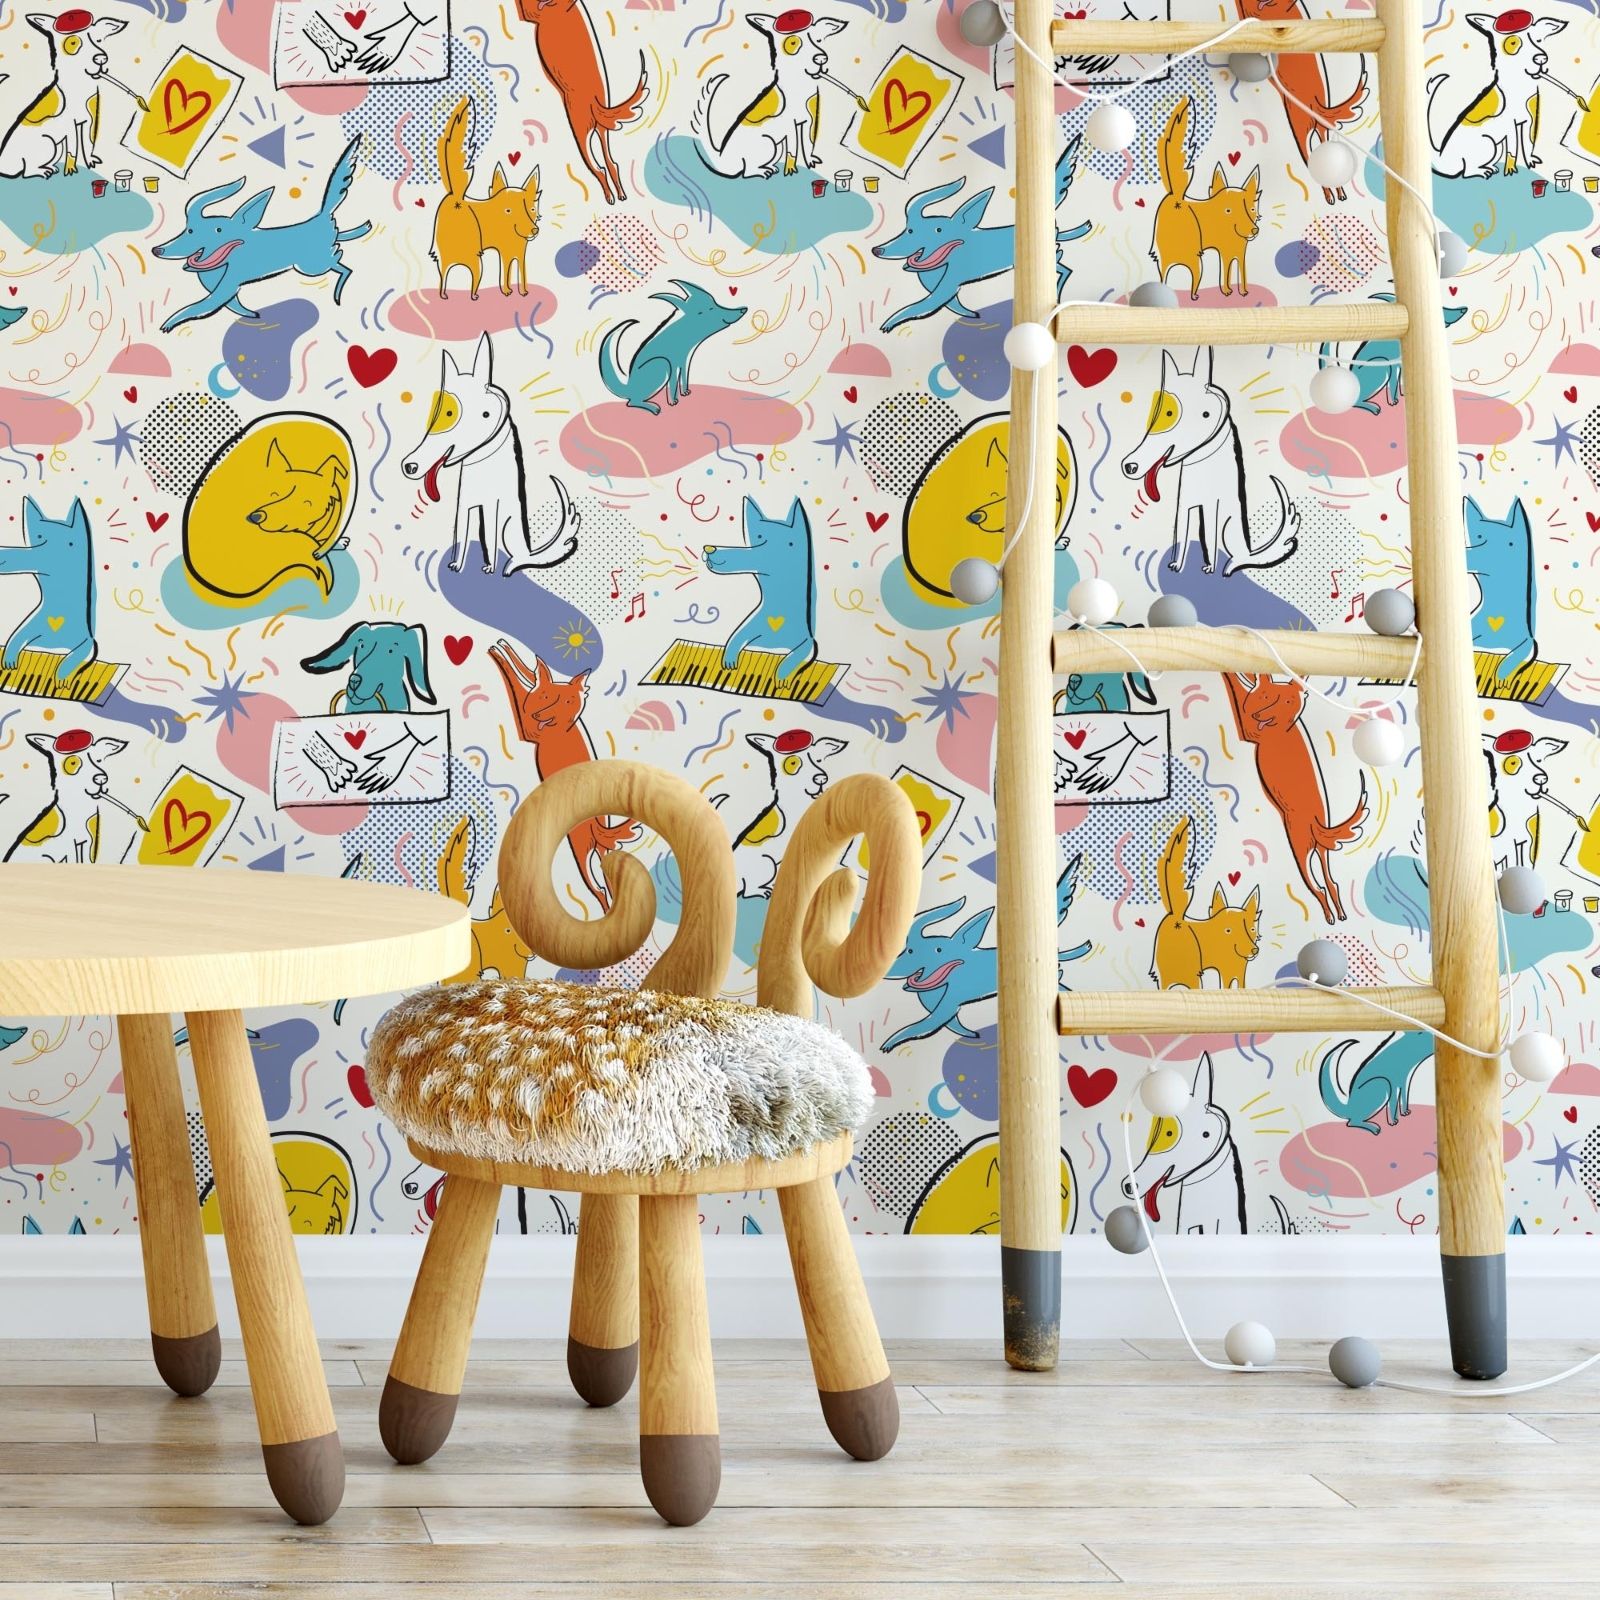 Dog Peel and Stick Wallpaper - Artful Dogs